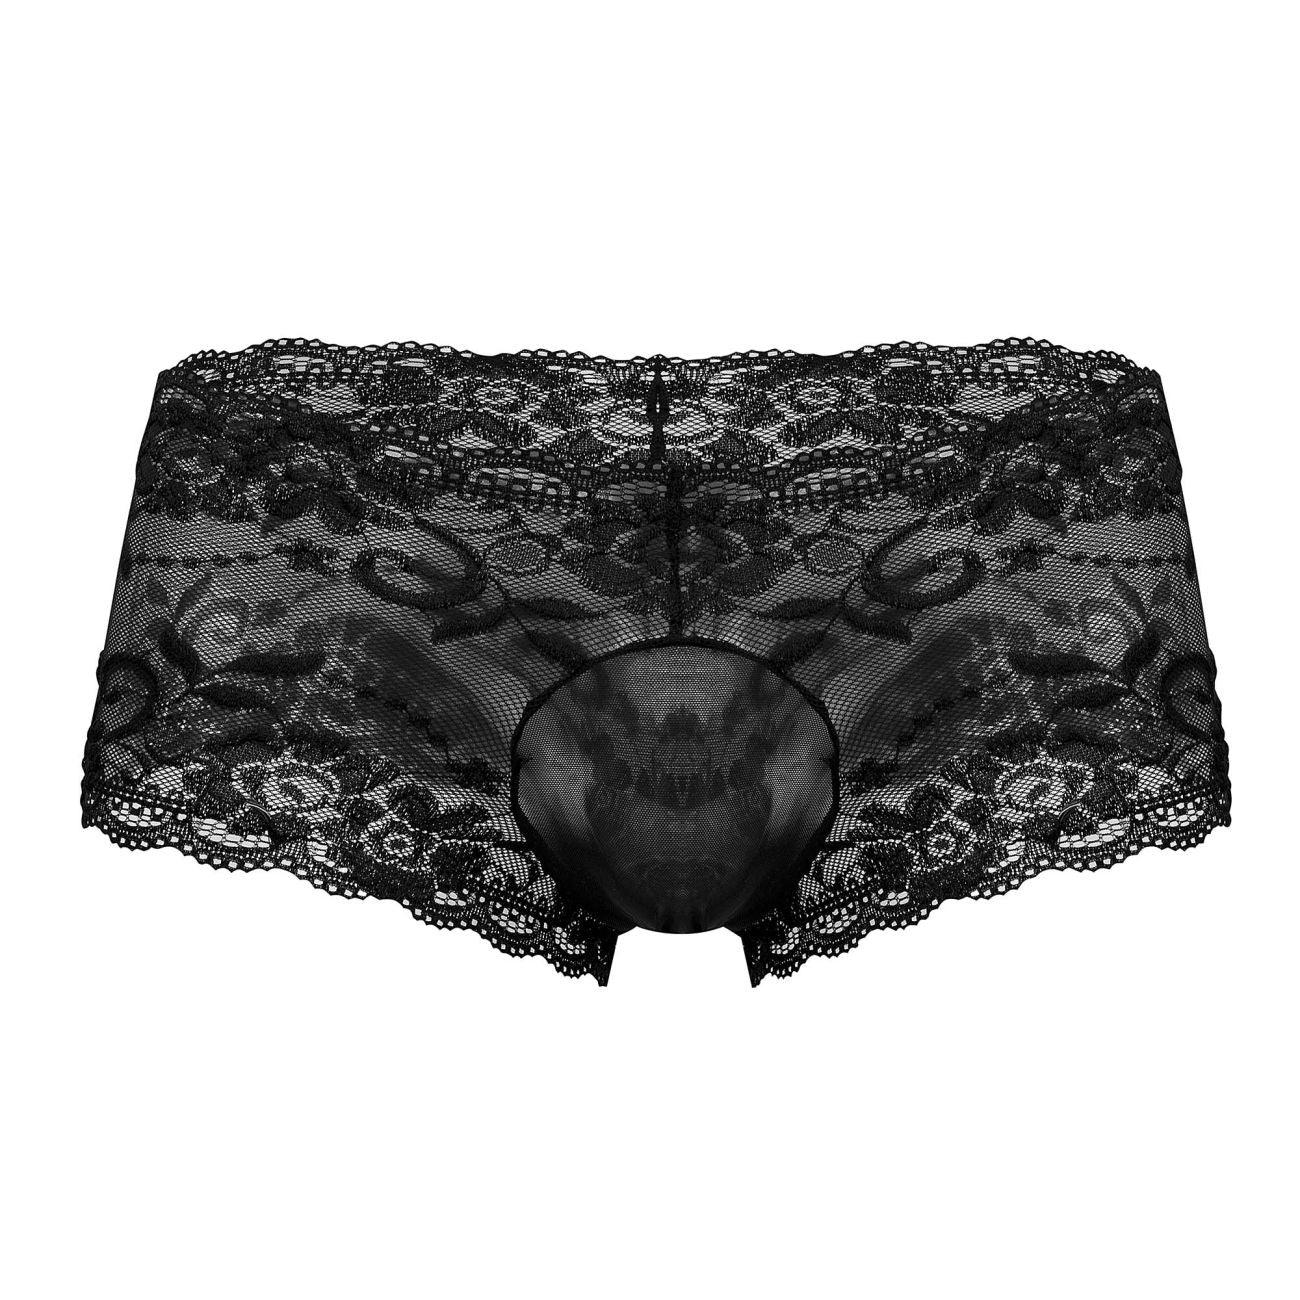 image of product,Sassy Lace Mini Short Sheer Pouch - SEXYEONE